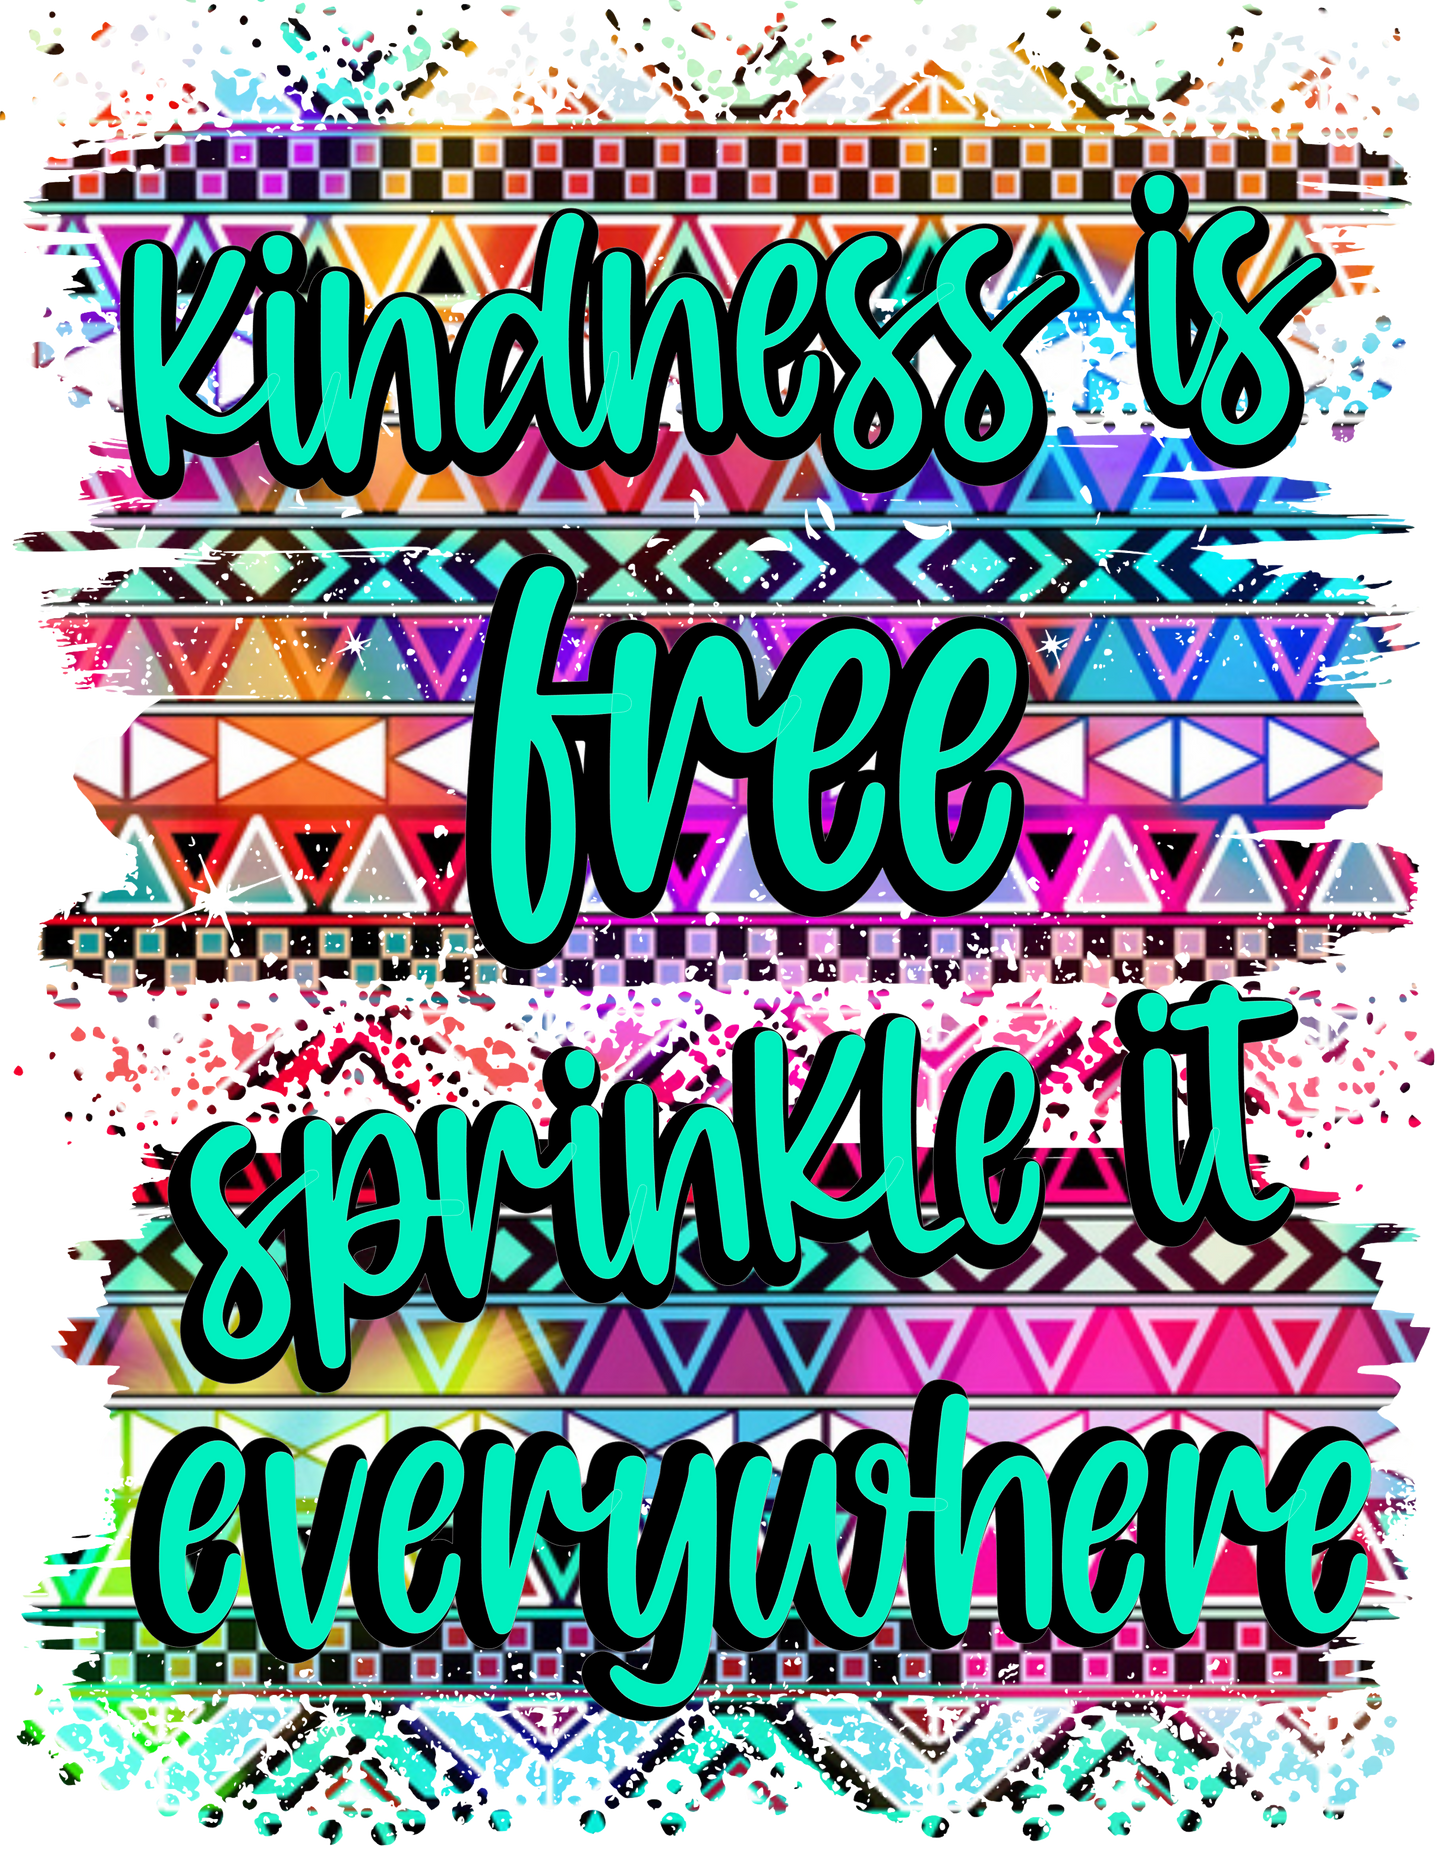 Kindness is Free